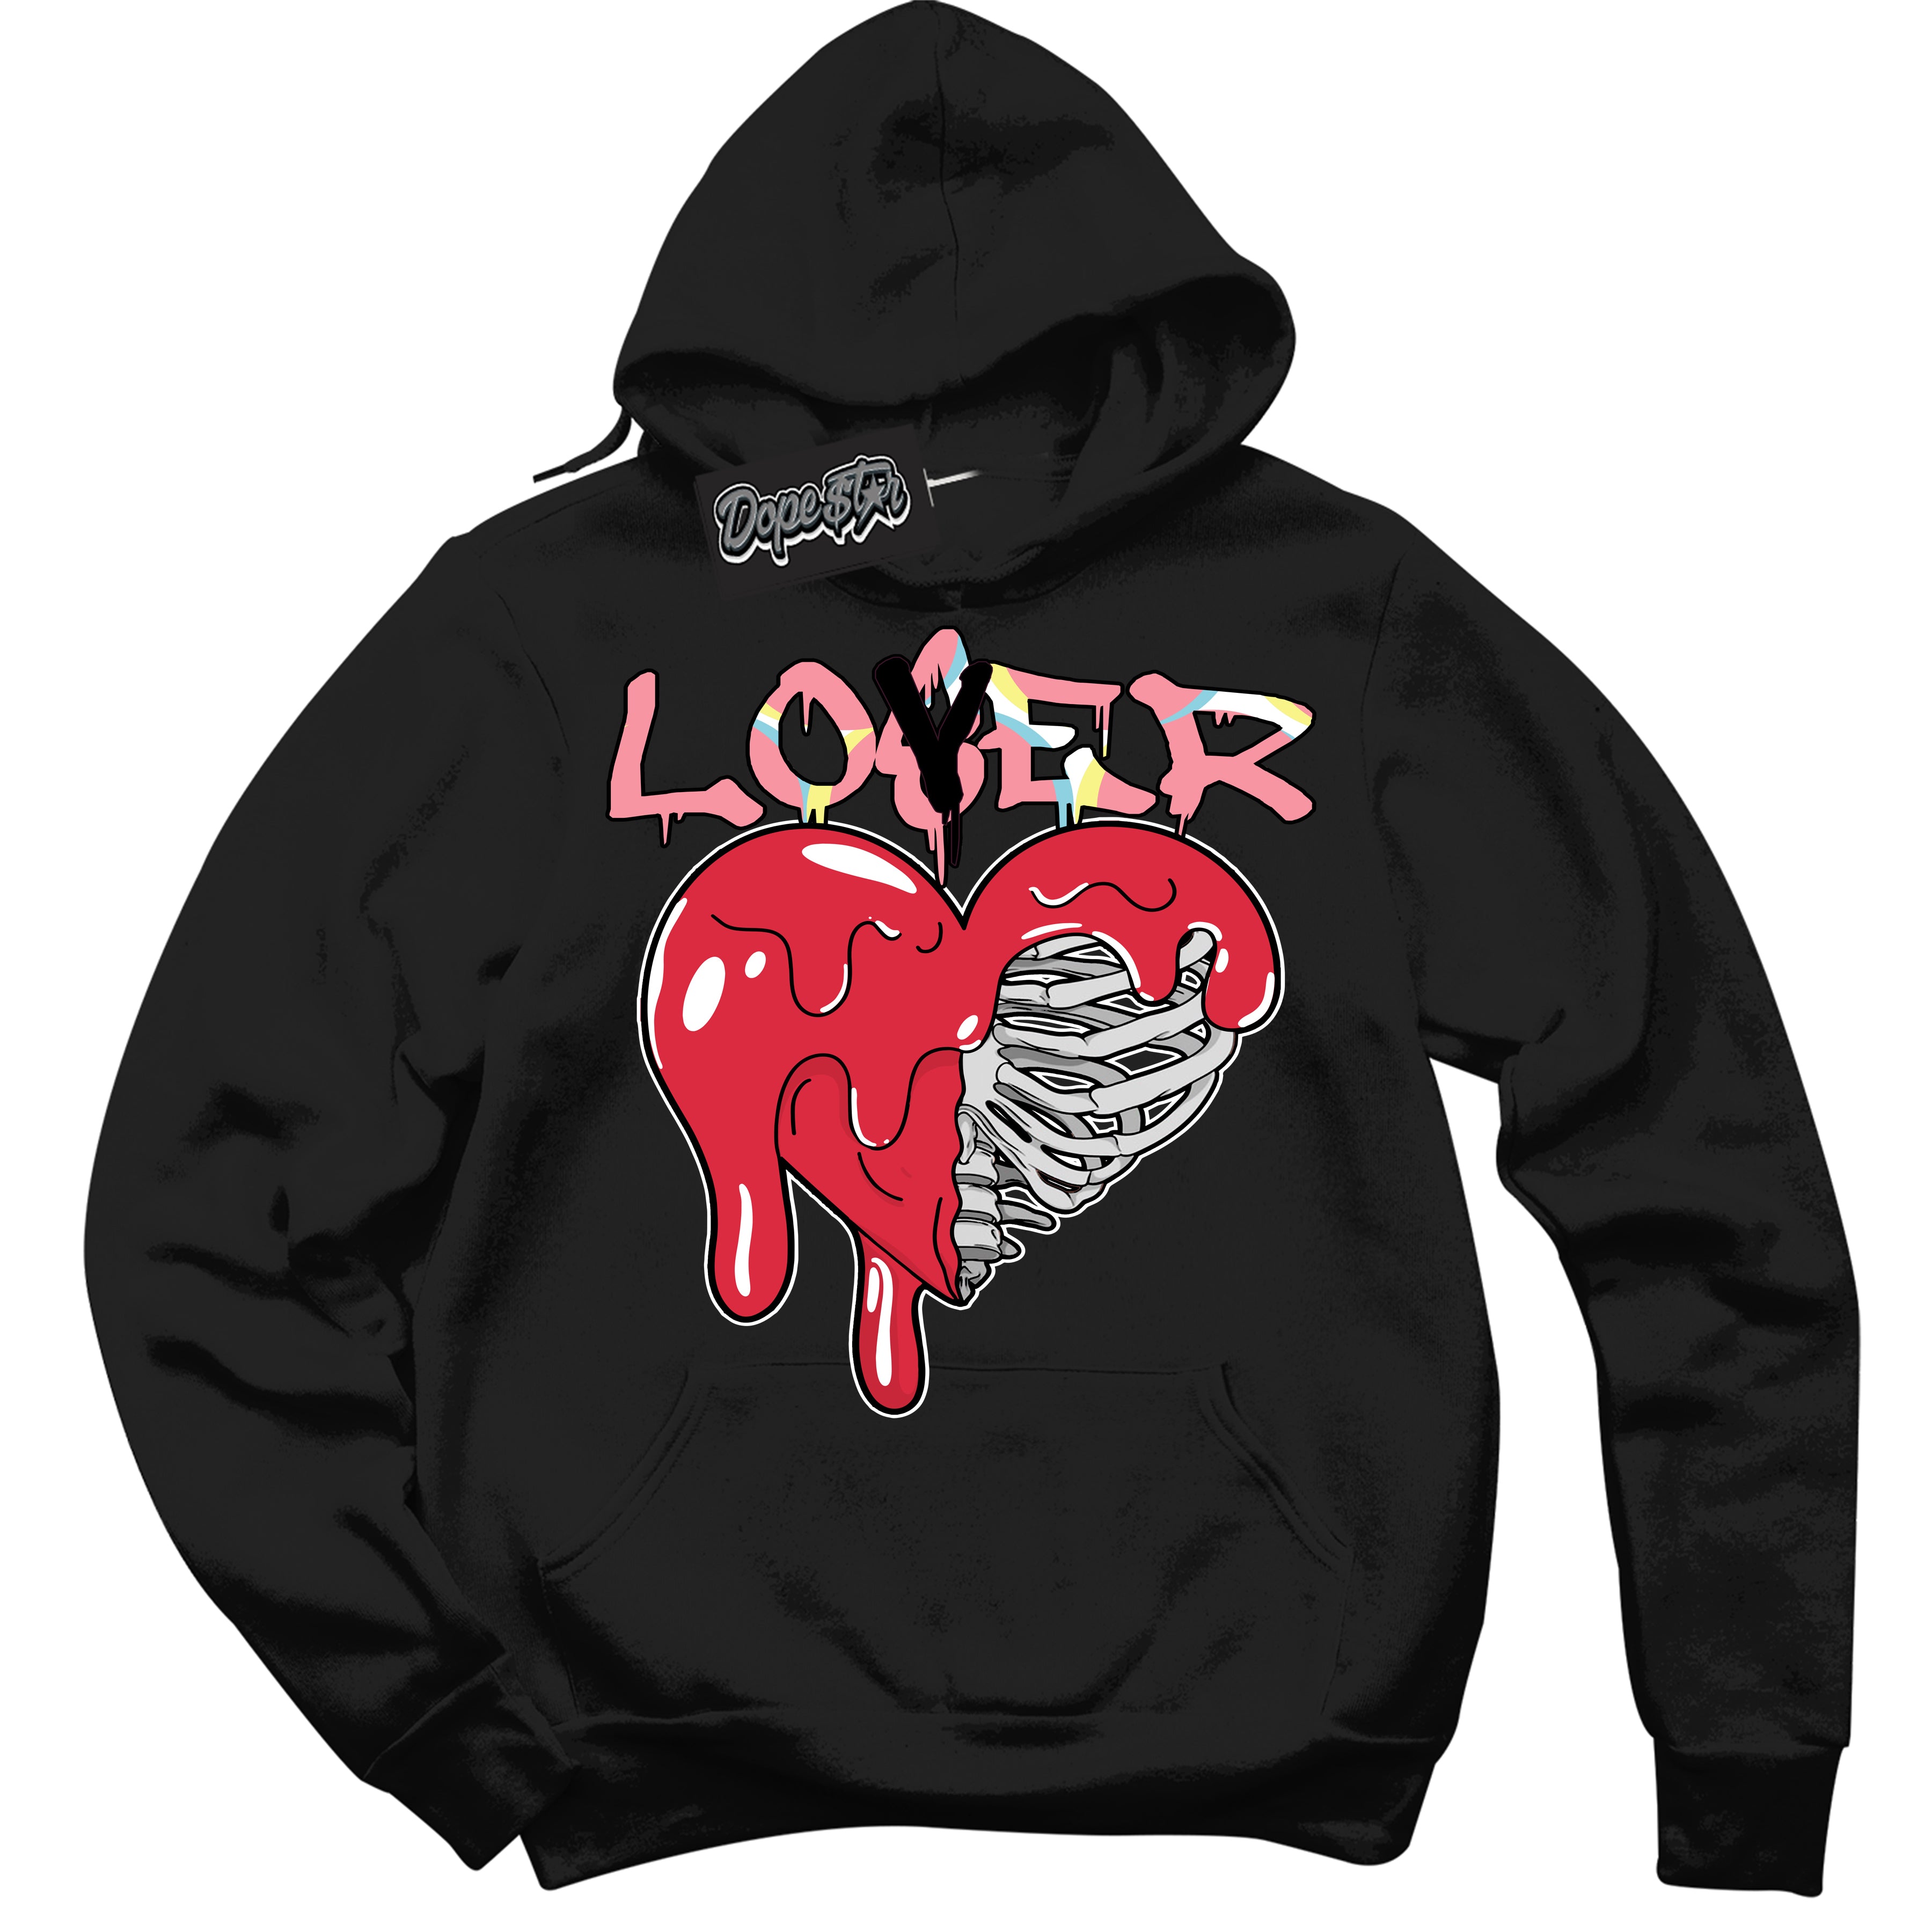 Cool Black Graphic DopeStar Hoodie with “ Lover Loser “ print, that perfectly matches Spider-Verse 1s sneakers